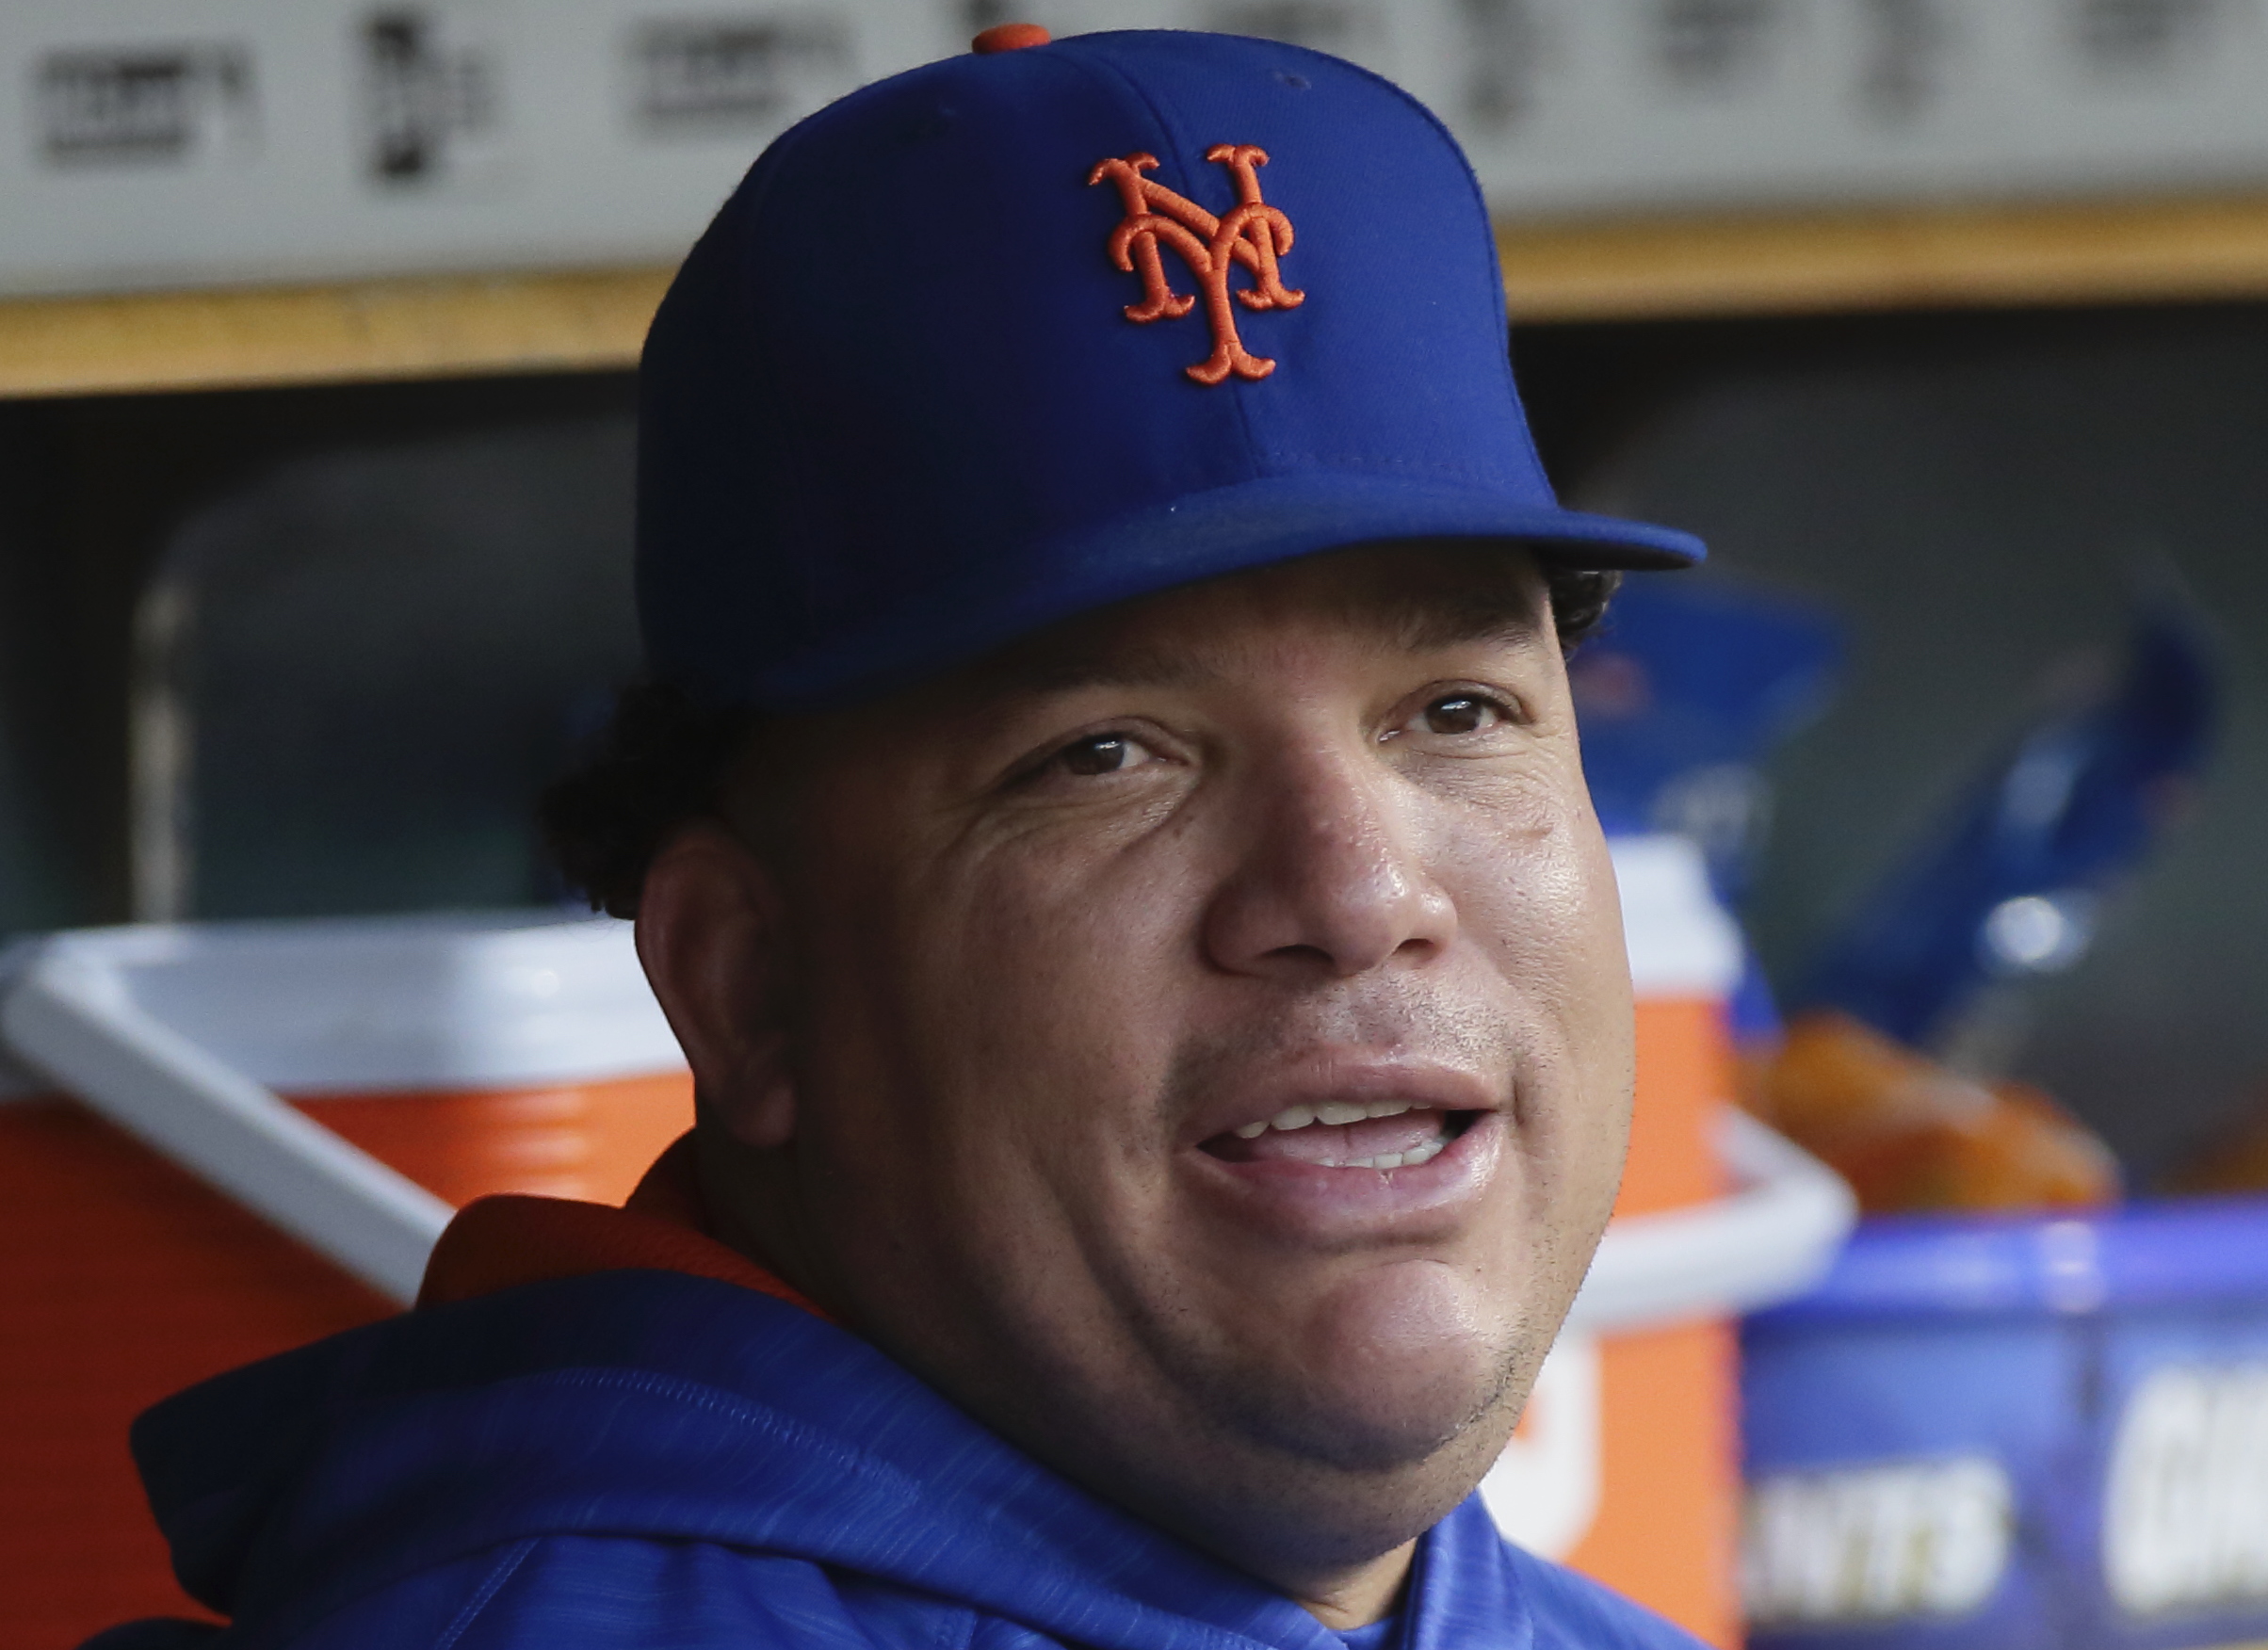 Bartolo Colon: Big Sexy Turns 45 - Cooperstown Cred